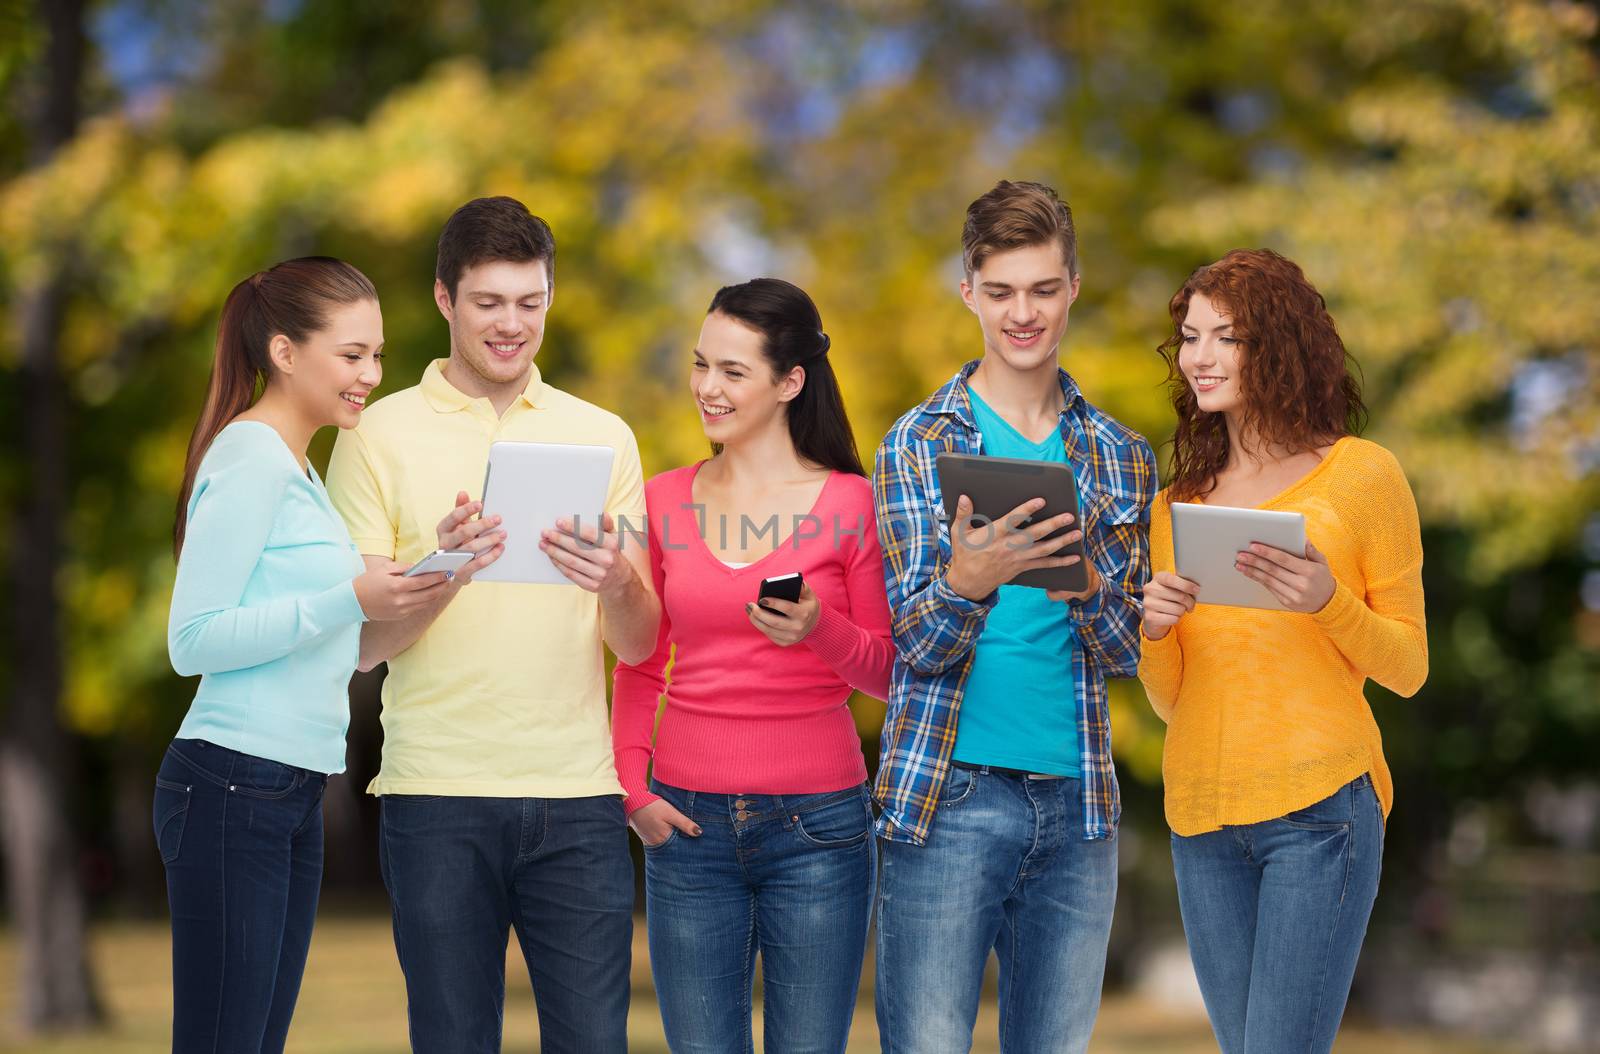 friendship, technology and people concept - group of smiling teenagers with smartphones and tablet pc computers over park background